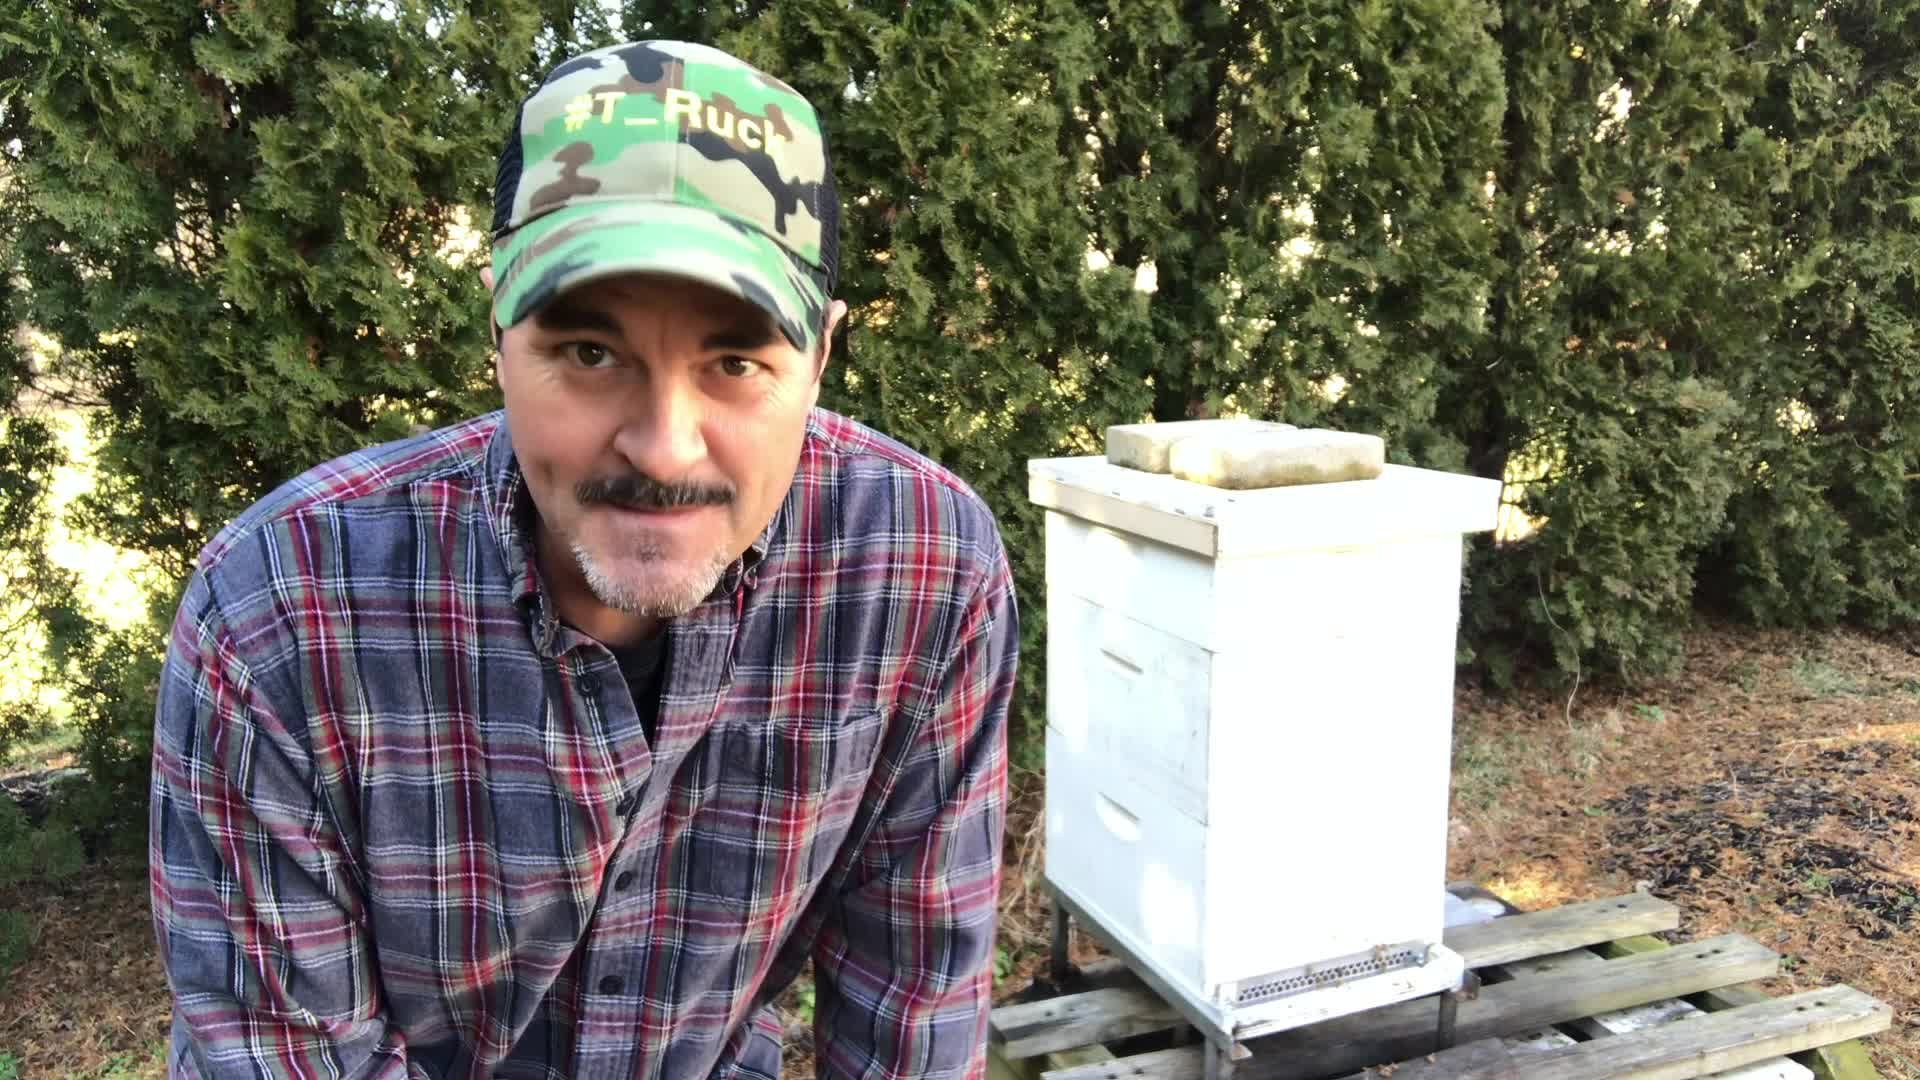 TRaveling with T_Ruck 🌎  feeding honey bees.